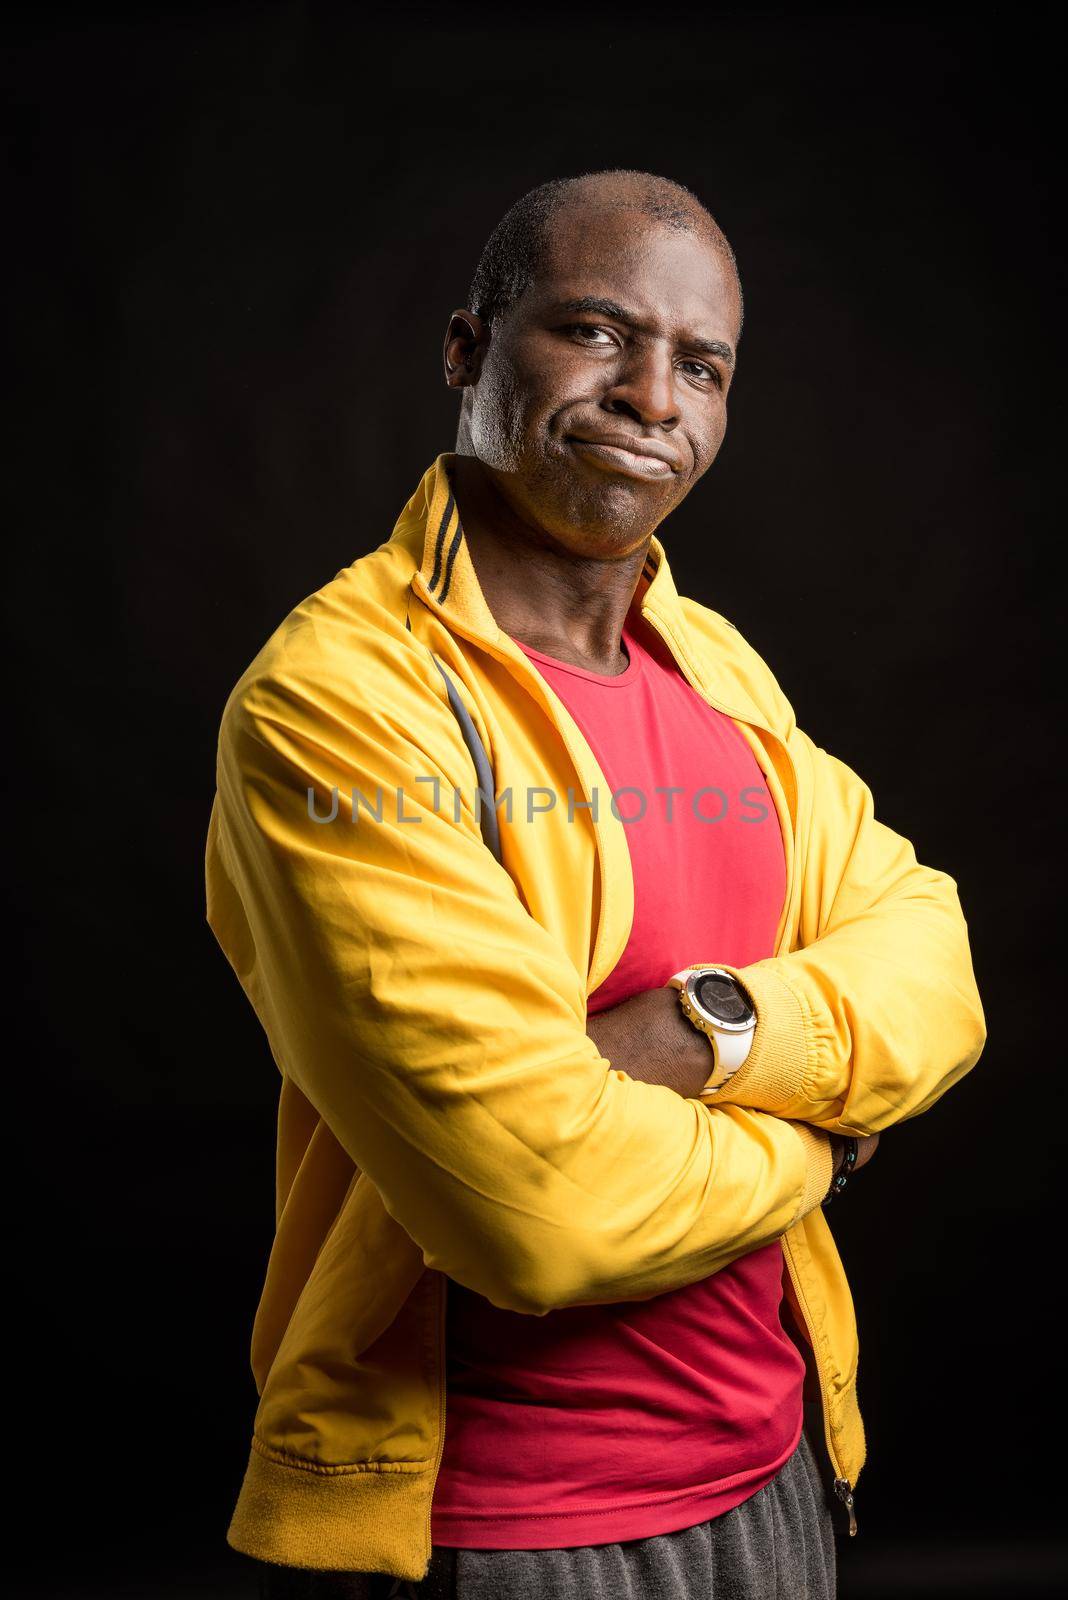 Portrait of an African American man with crossed arms standing looking at the camera. Adult male in yellow jacket and red t-shirt in a studio with black background.